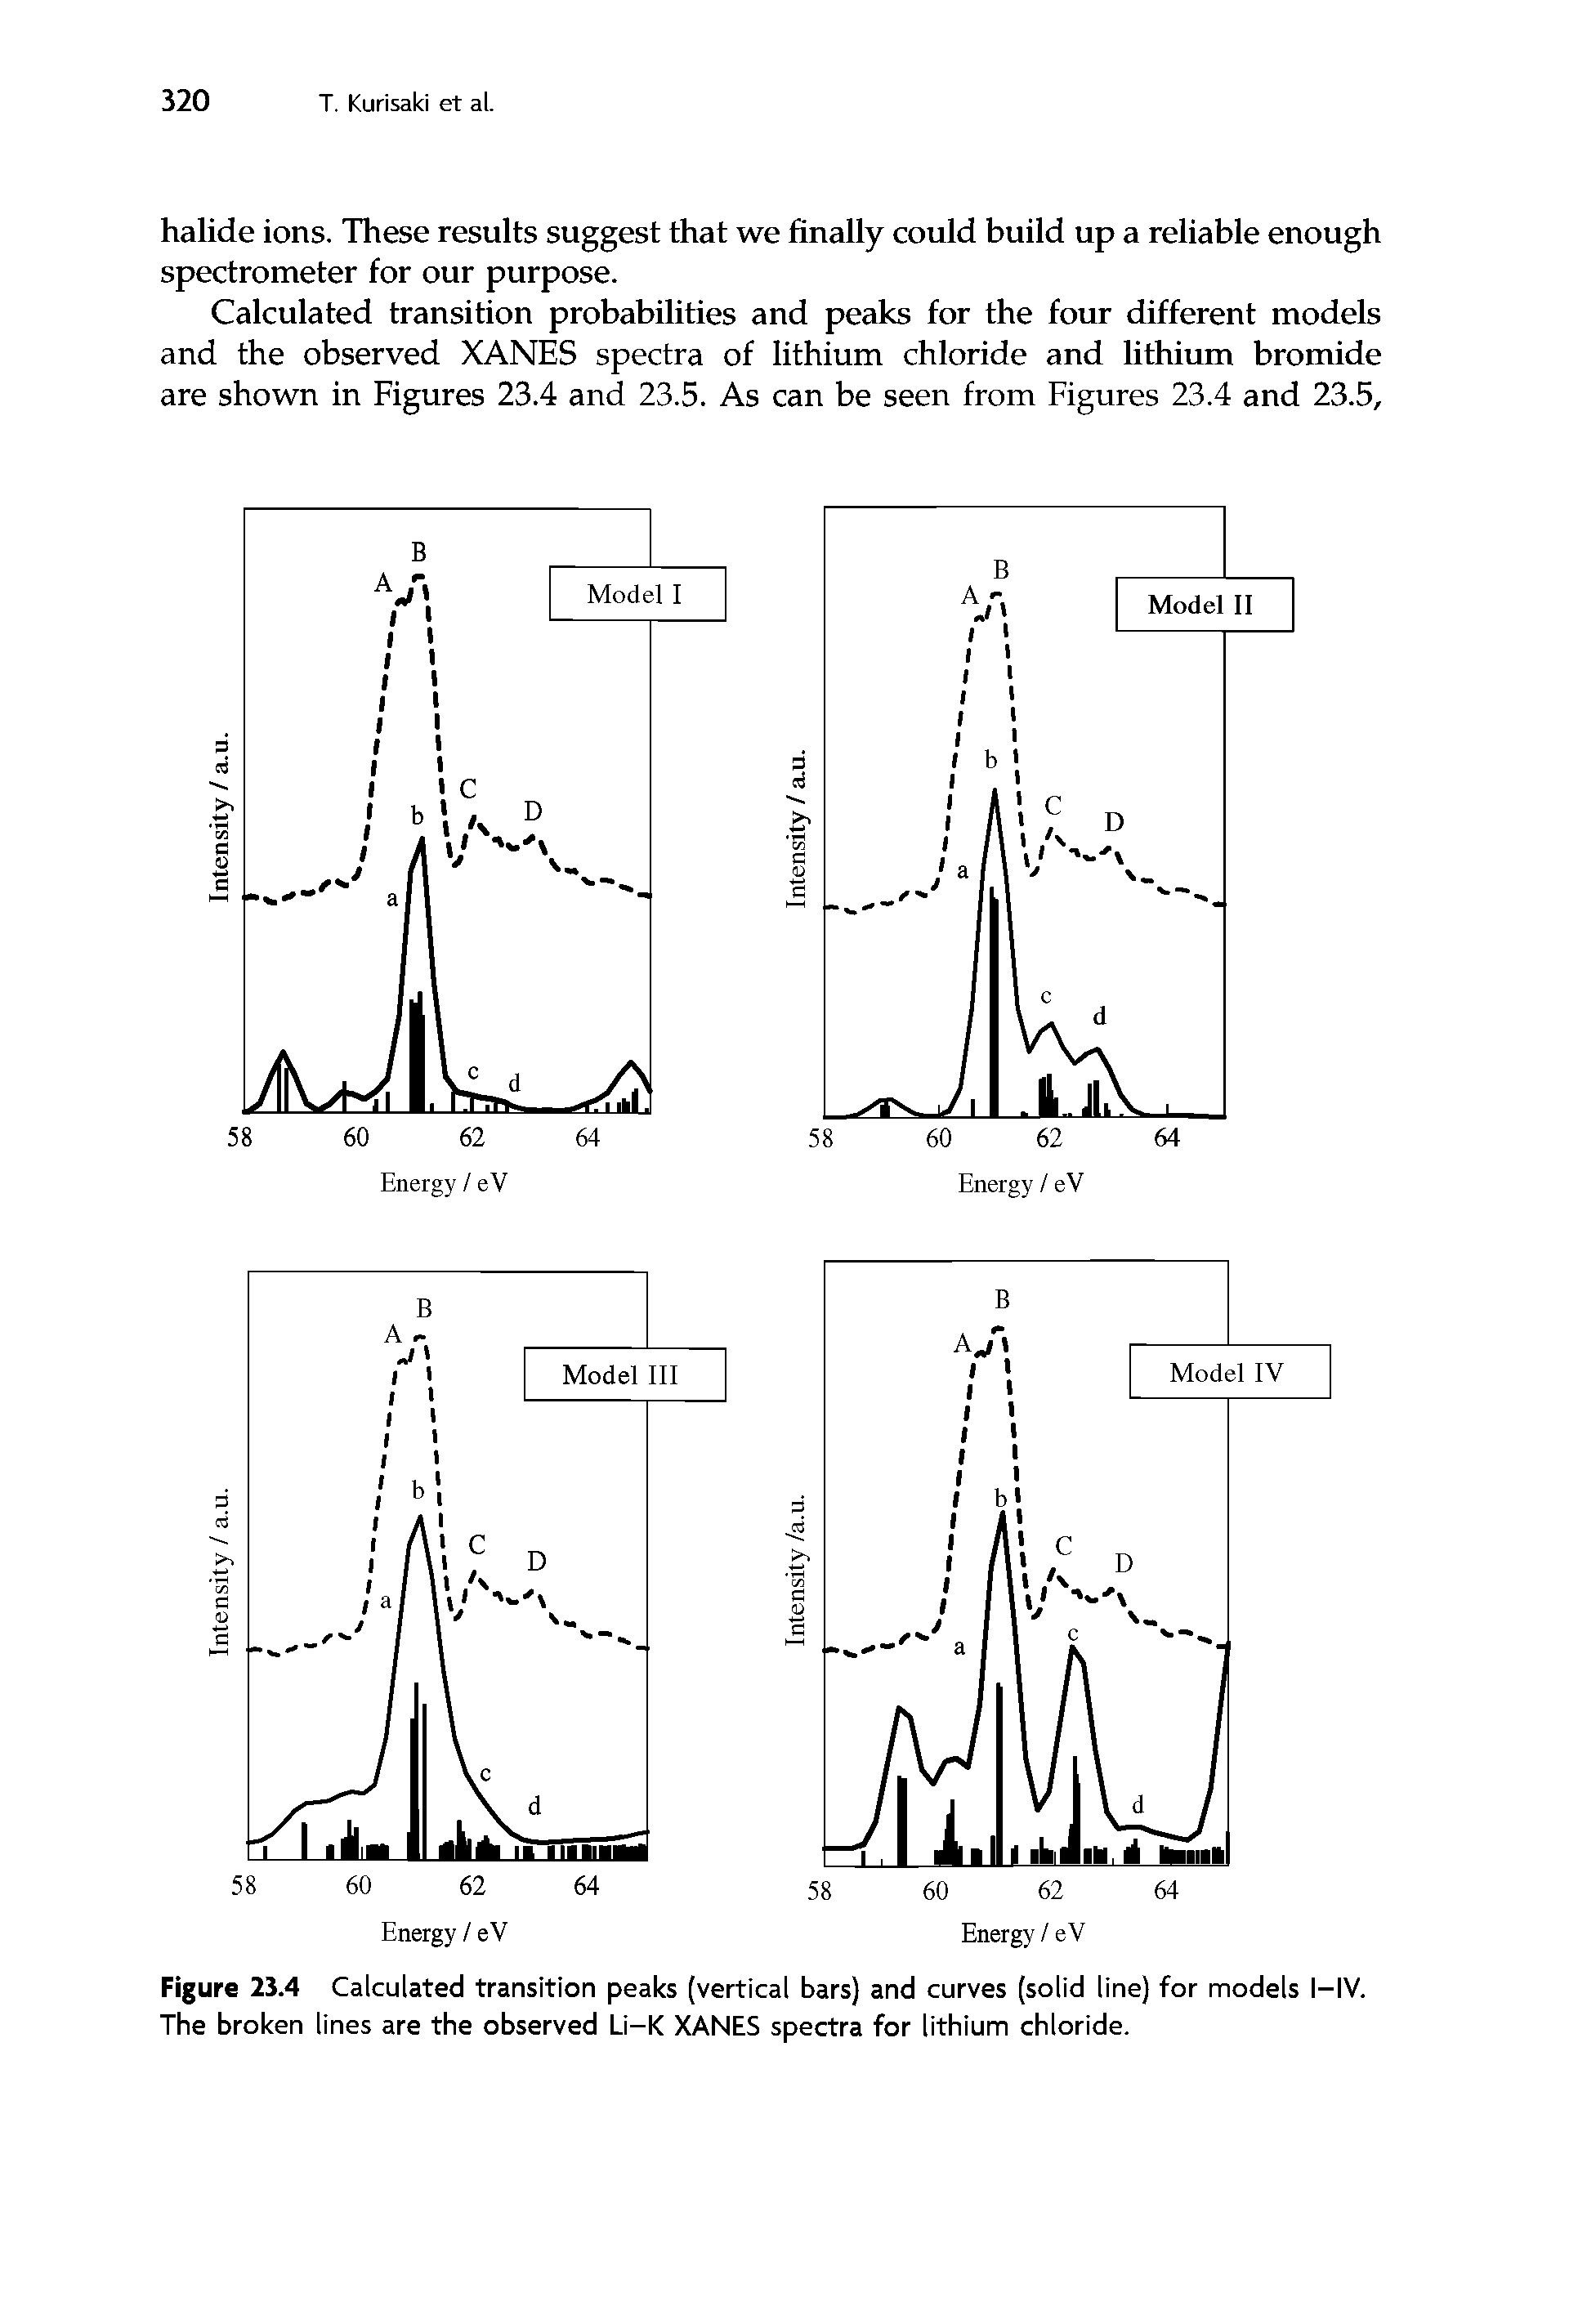 Figure 23.4 Calculated transition peaks (vertical bars) and curves (solid line) for models I—IV. The broken lines are the observed Li-K XANES spectra for lithium chloride.